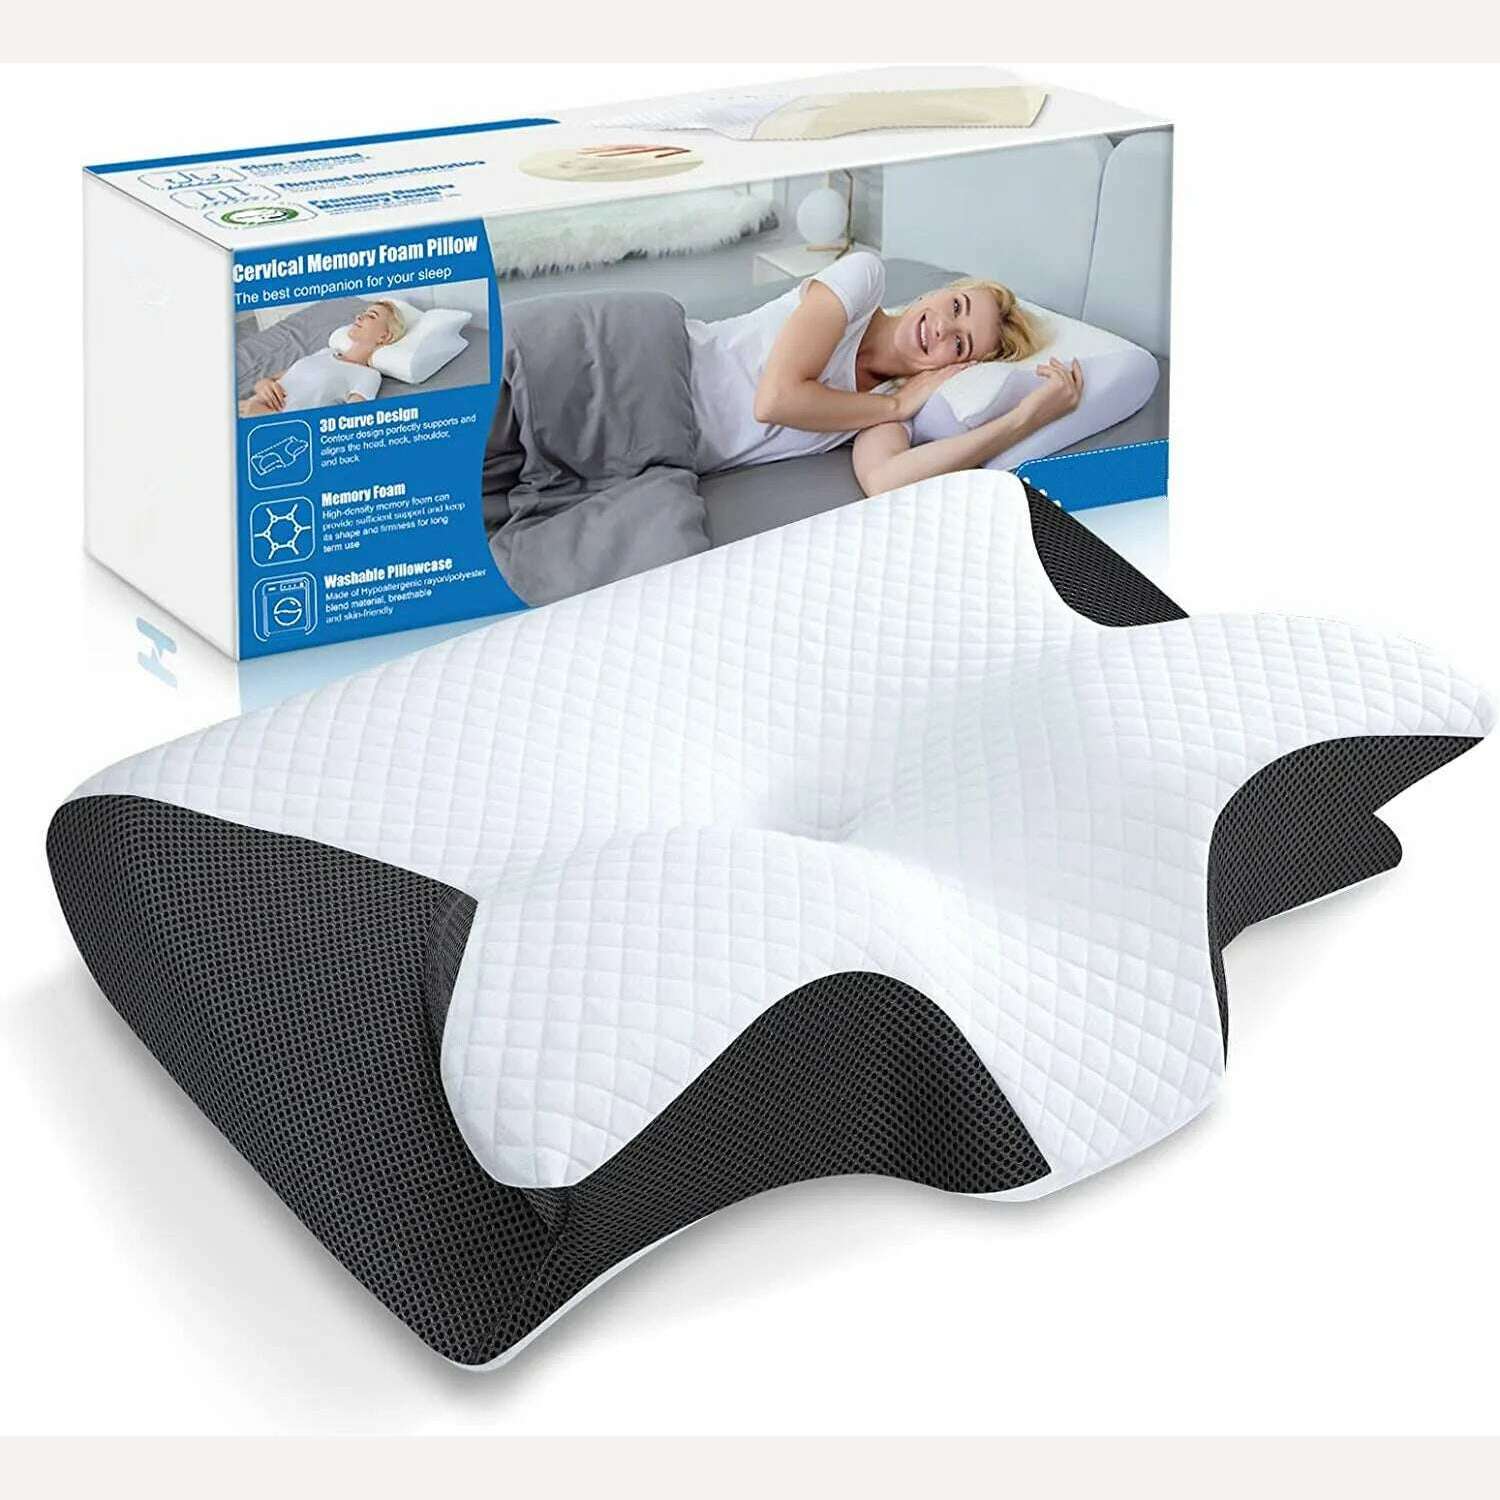 KIMLUD, Cervical Memory Foam Pillow Contour Pillow for Neck and Shoulder Pain Orthopedic Sleep Neck Contour Pillow for Side Sleeping, black / No box, KIMLUD Women's Clothes